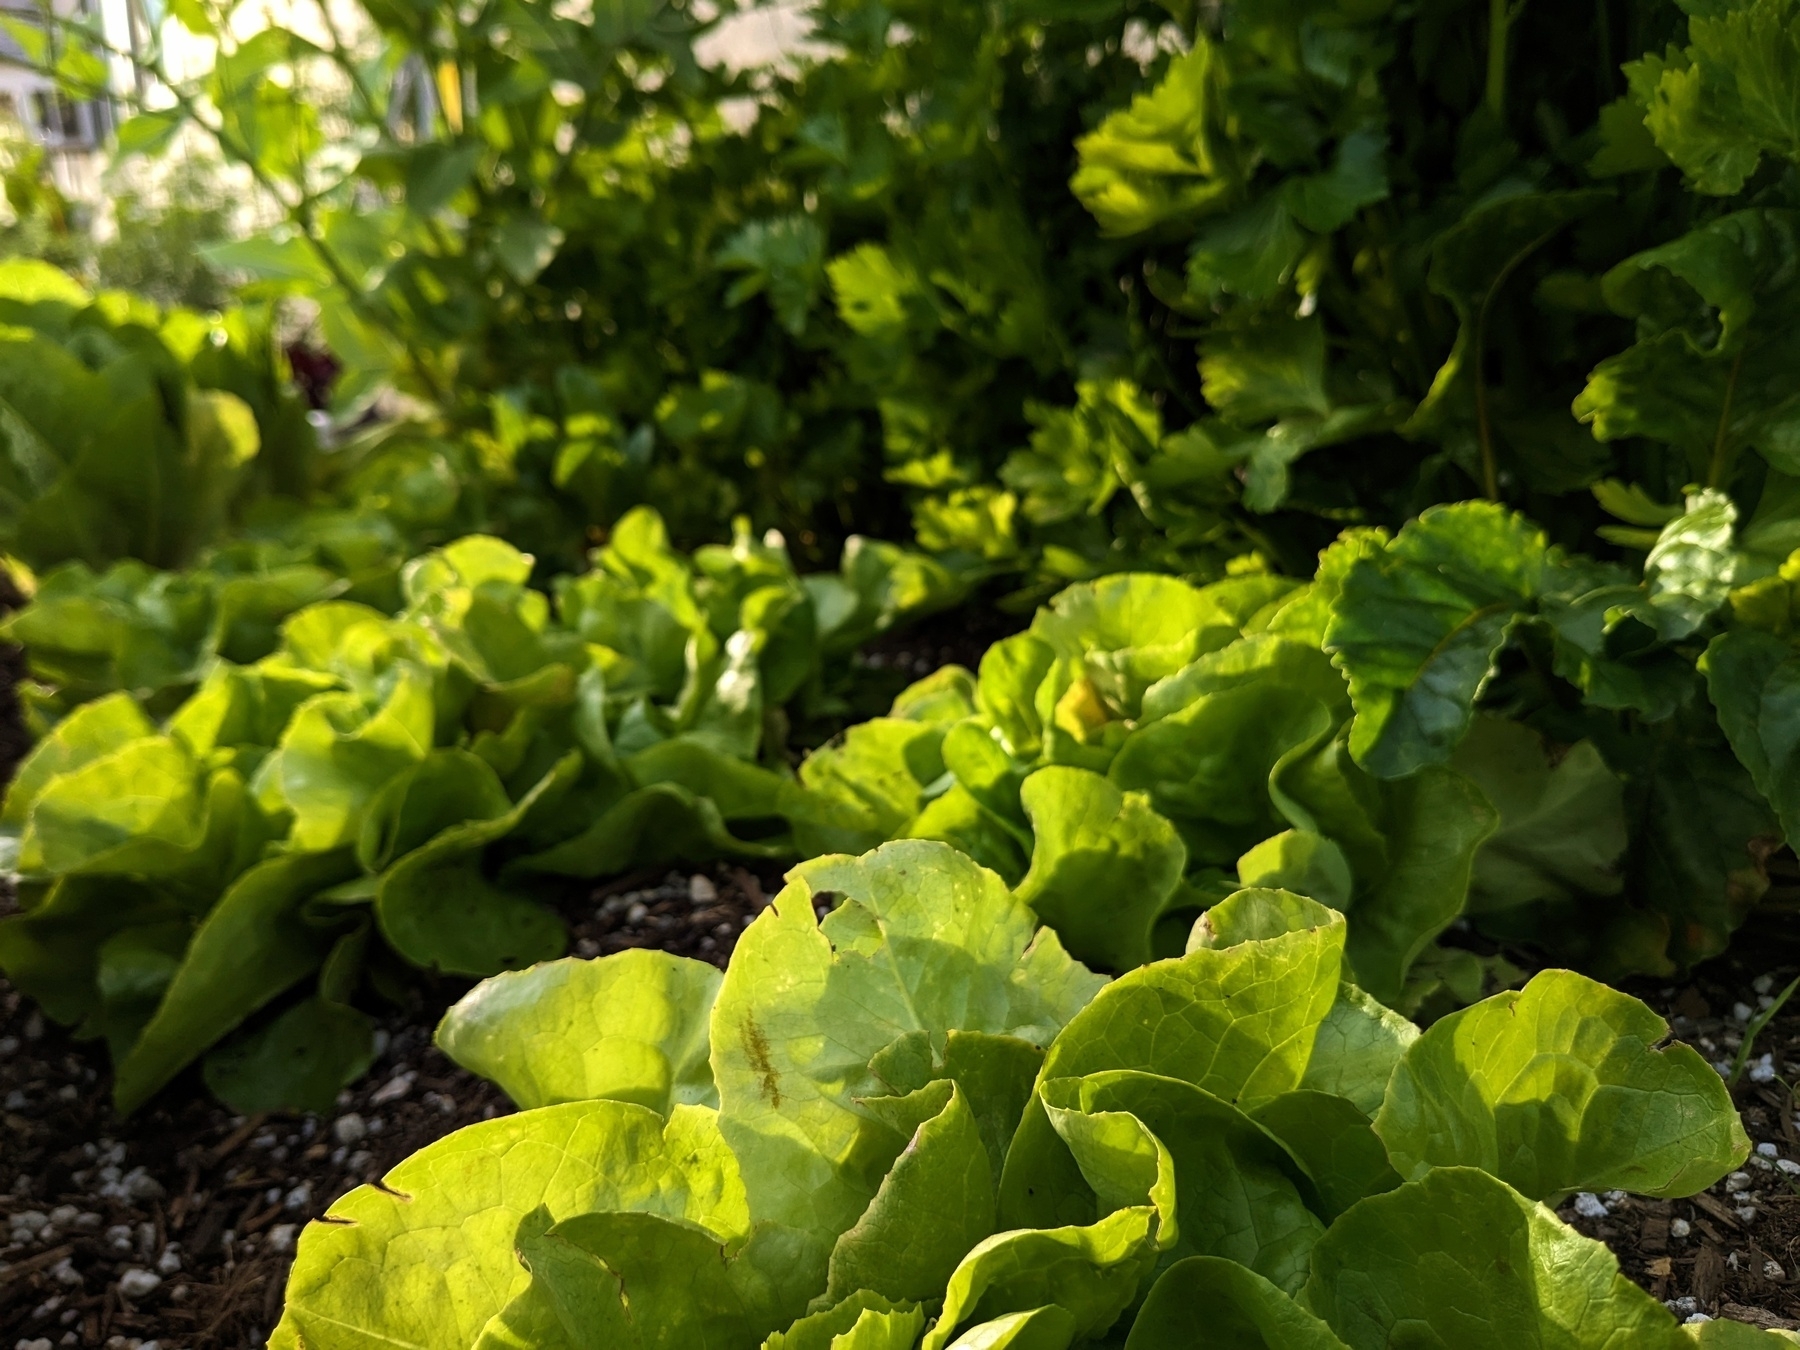 Close up of a head of butter lettuce with celery and more lettuce growing in the background.